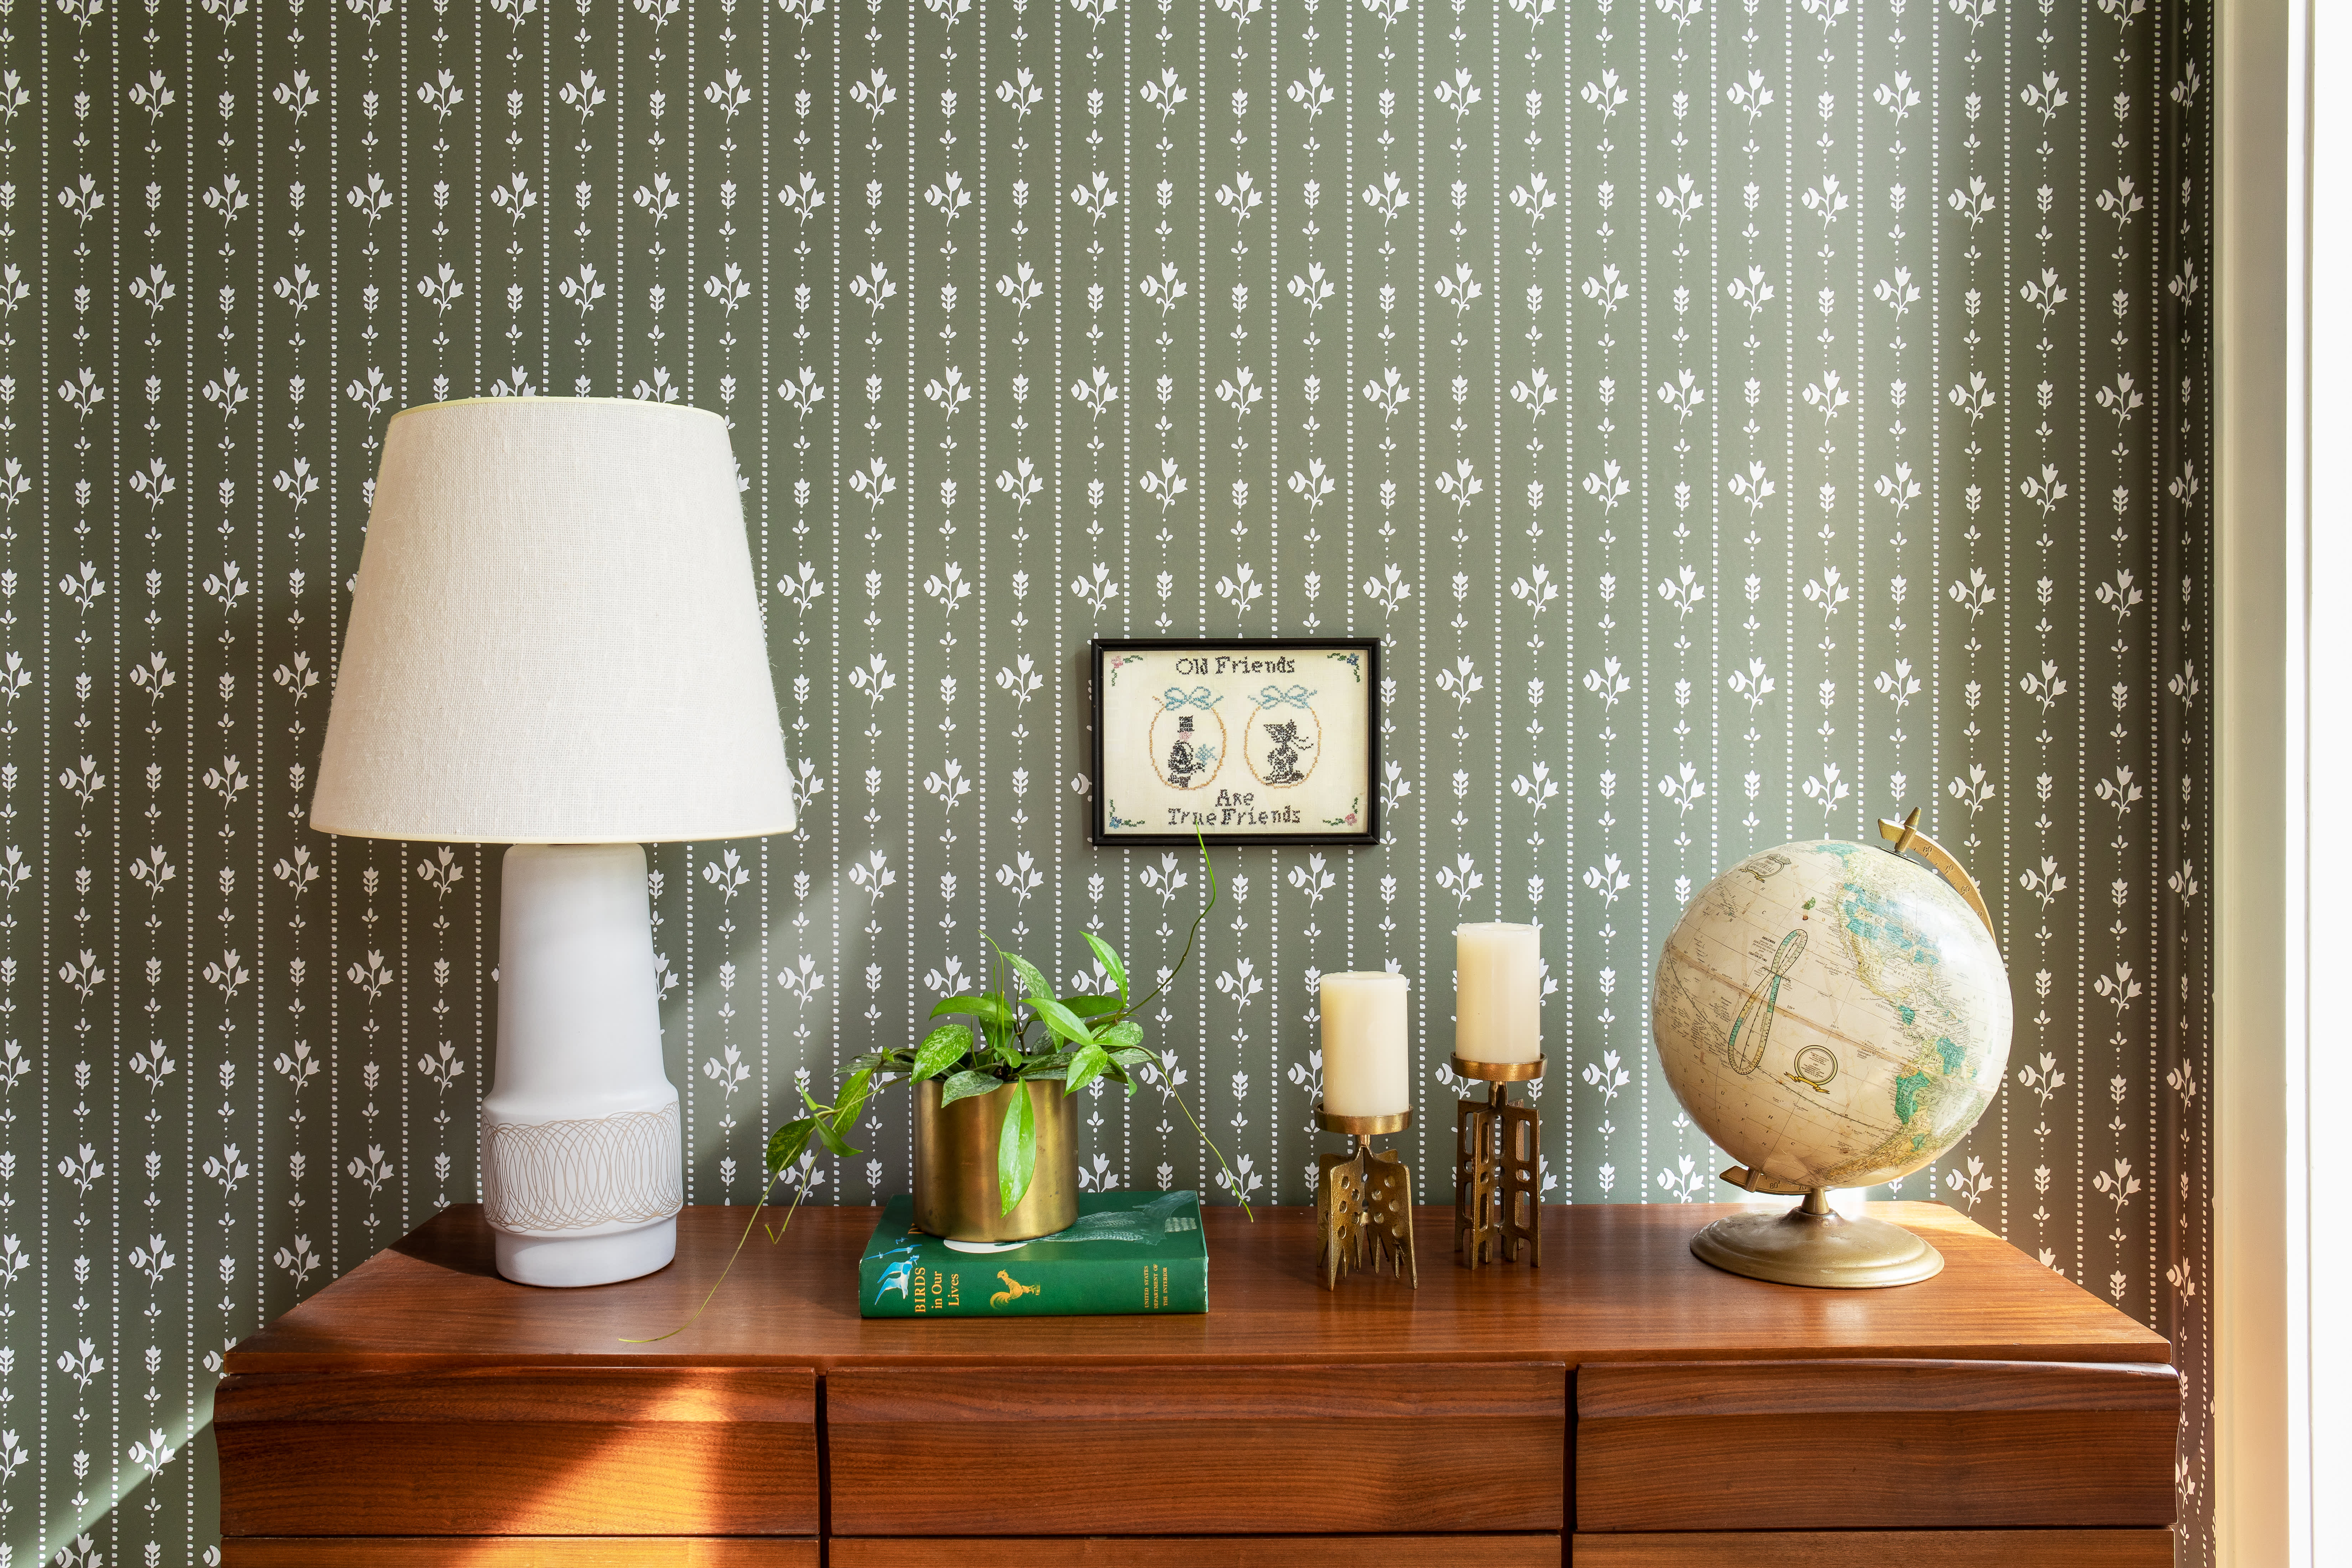 Chasing Paper Wall Panels  Stamped Dot  Chasing paper Wallpaper panels  Removable wallpaper